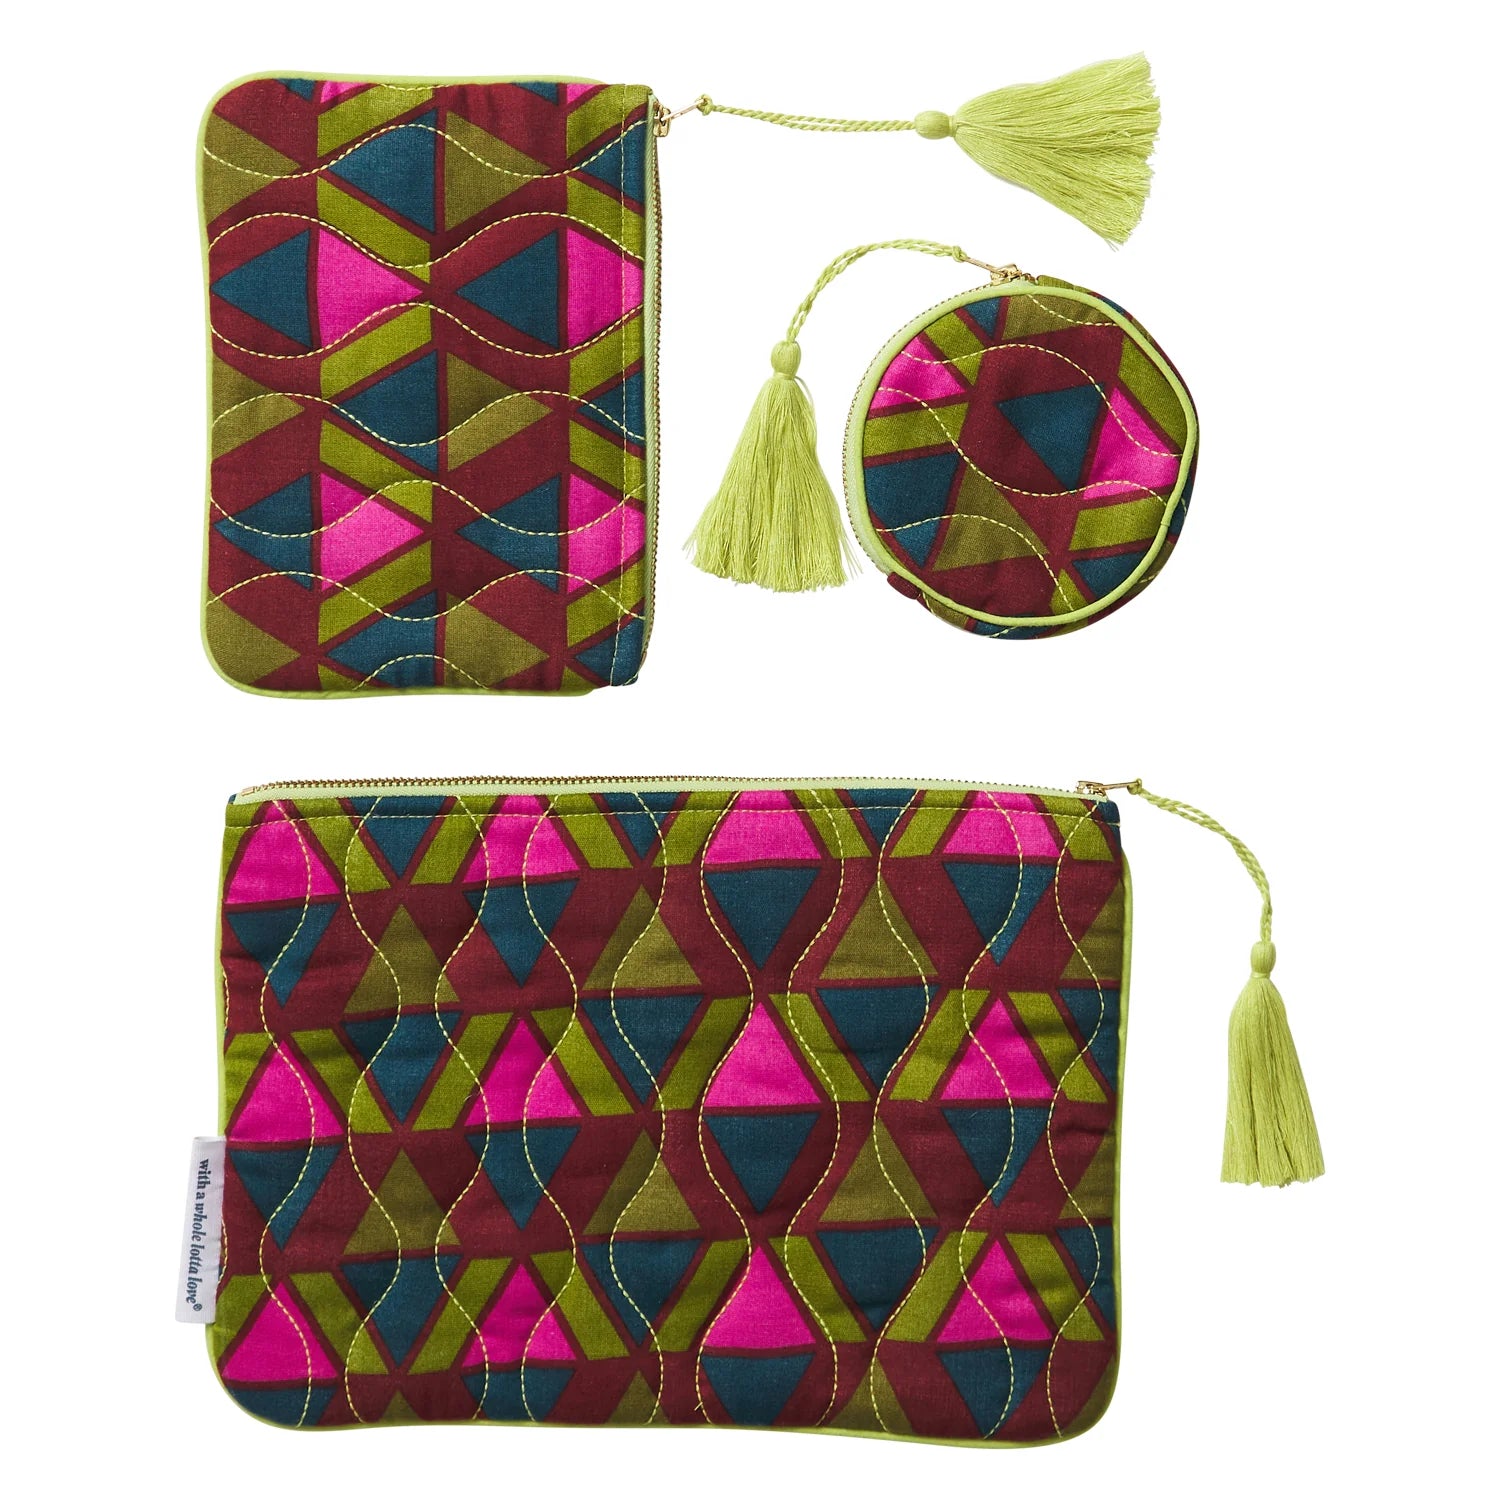 Pirro Pouch Set by 